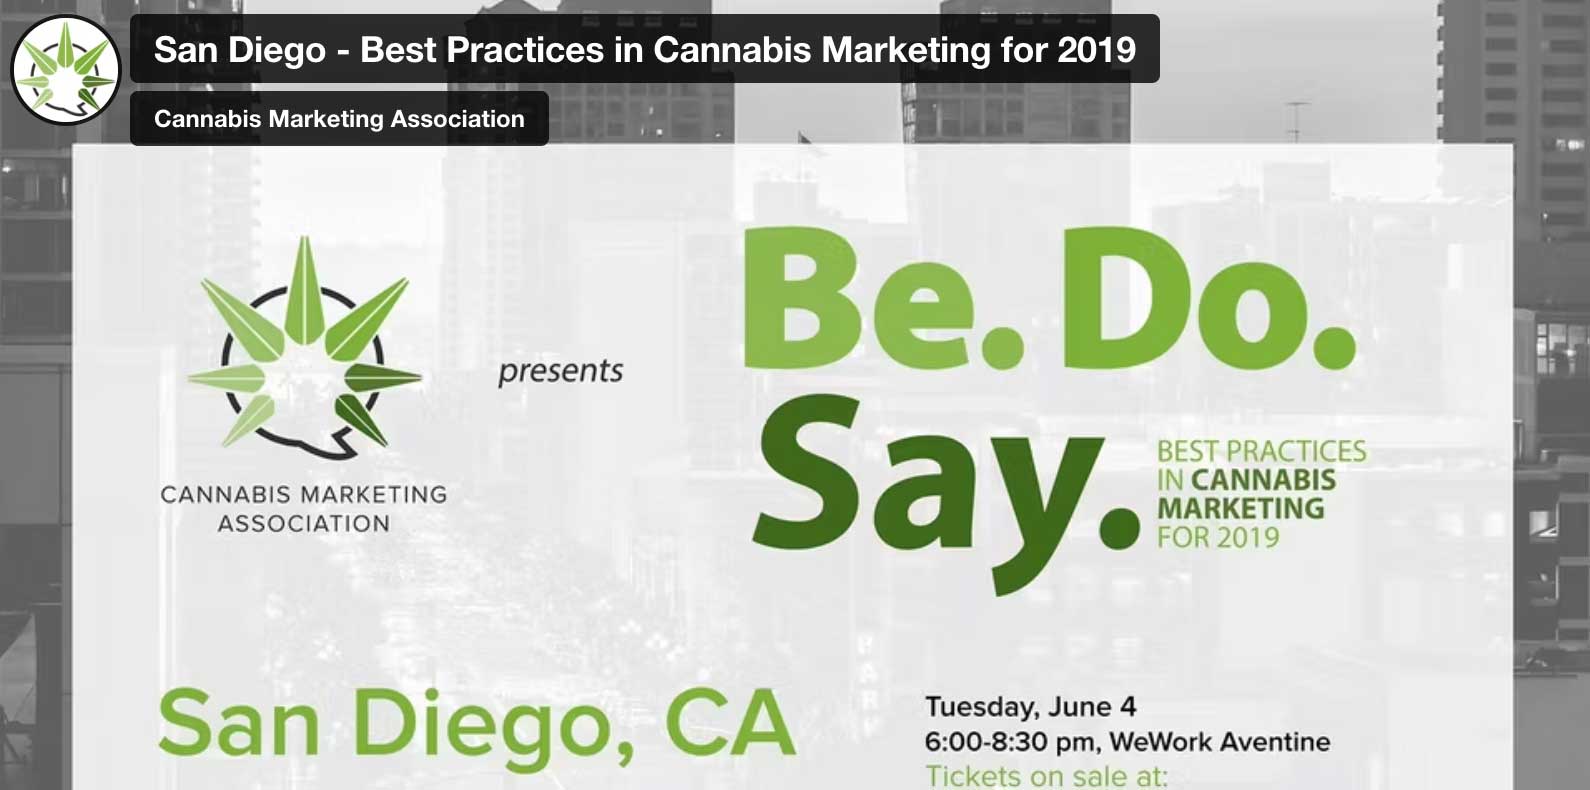 CMA: Best Practices in Cannabis Marketing for 2019, San Diego